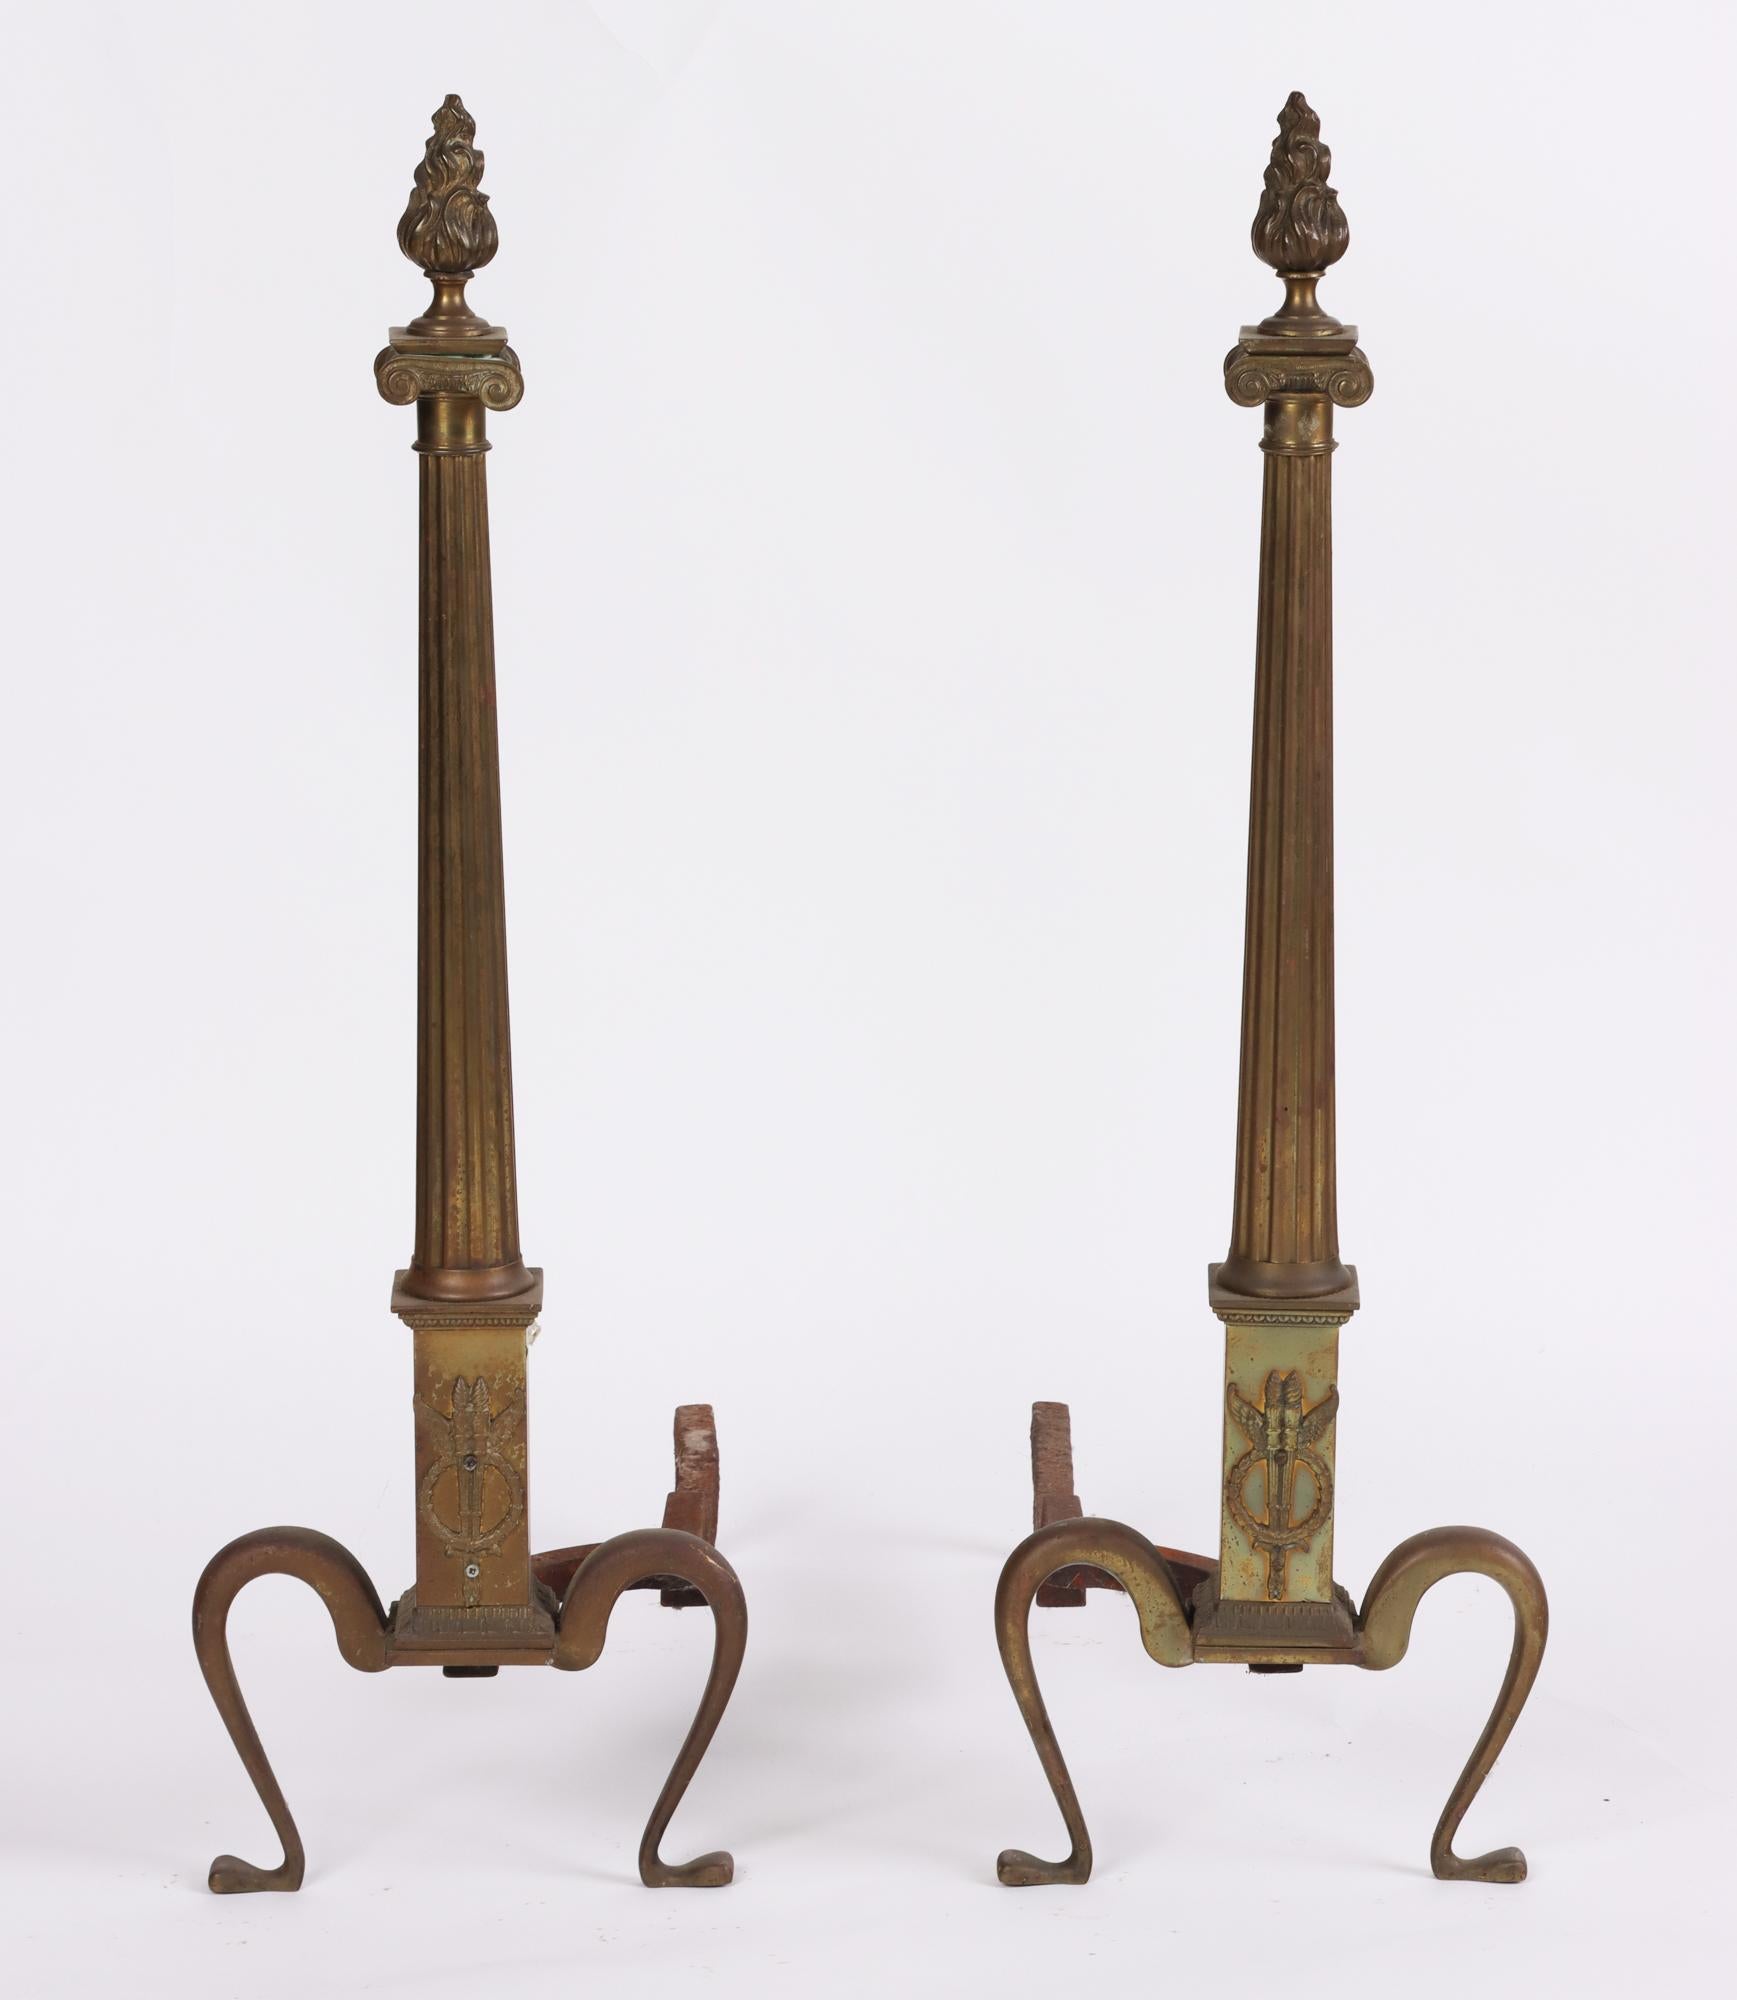 A pair of early 20th century Neoclassical brass Andirons with flame finials and column shaft and overly curved legs.